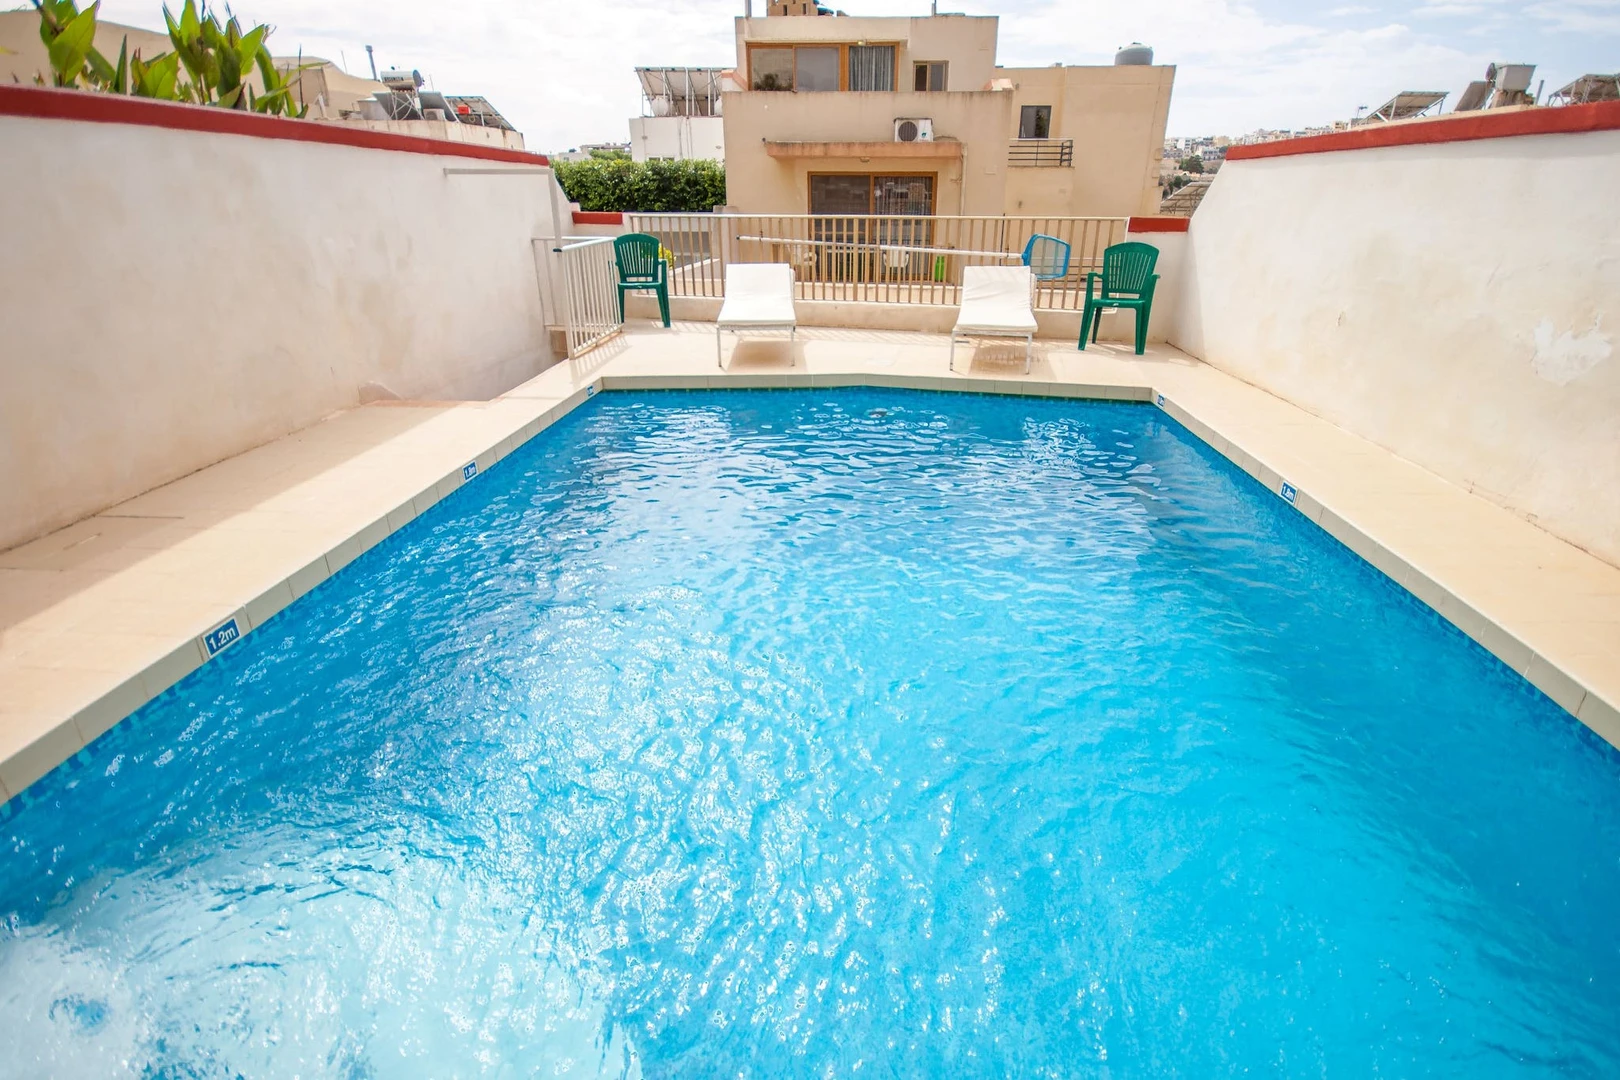 Two bedroom accommodation in Malta